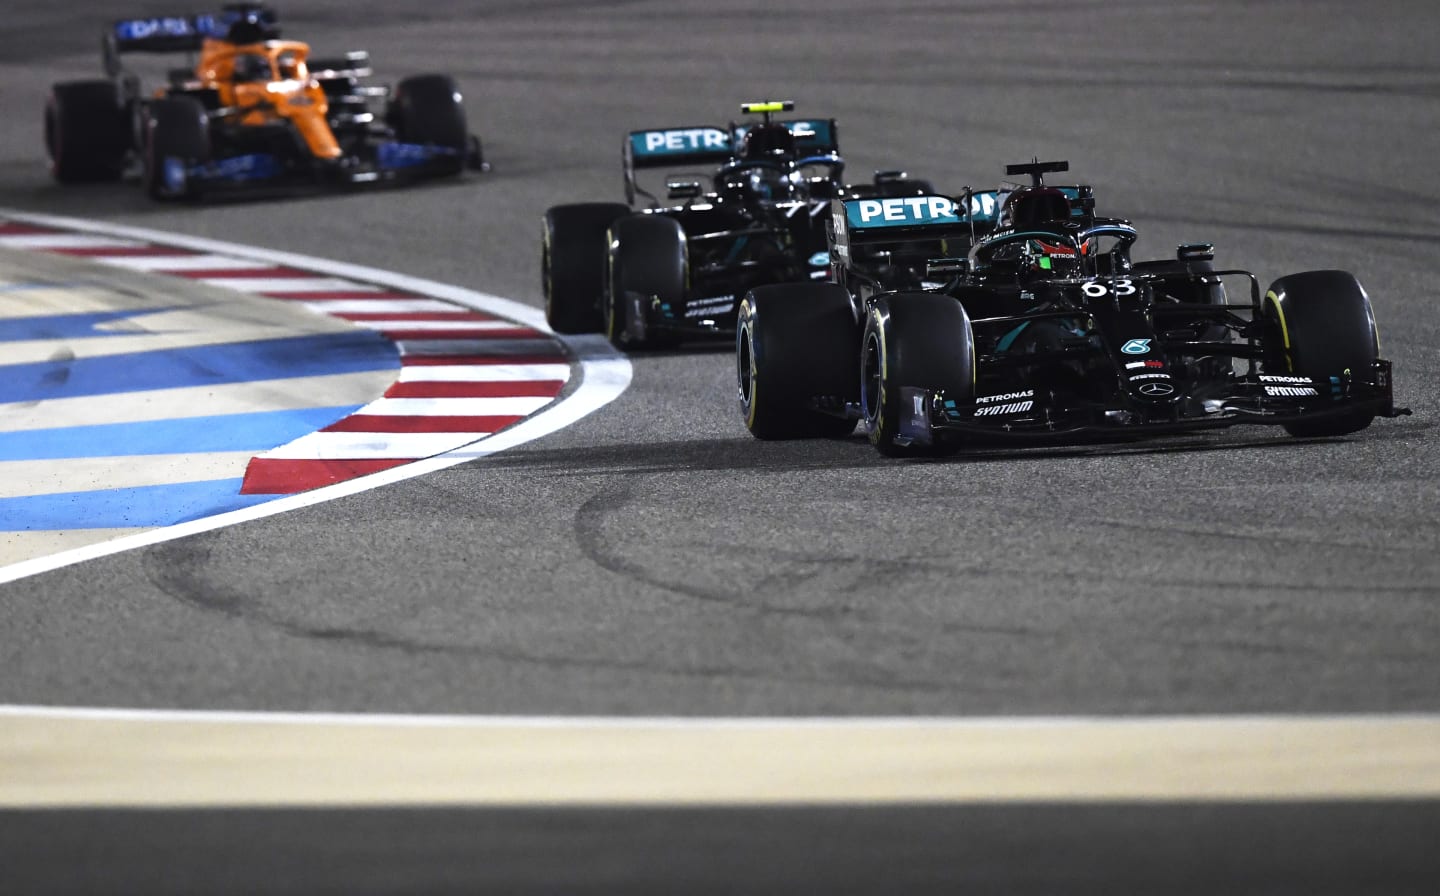 BAHRAIN, BAHRAIN - DECEMBER 06: George Russell of Great Britain driving the (63) Mercedes AMG Petronas F1 Team Mercedes W11 leads Valtteri Bottas of Finland driving the (77) Mercedes AMG Petronas F1 Team Mercedes W11 on track during the F1 Grand Prix of Sakhir at Bahrain International Circuit on December 06, 2020 in Bahrain, Bahrain. (Photo by Rudy Carezzevoli/Getty Images)